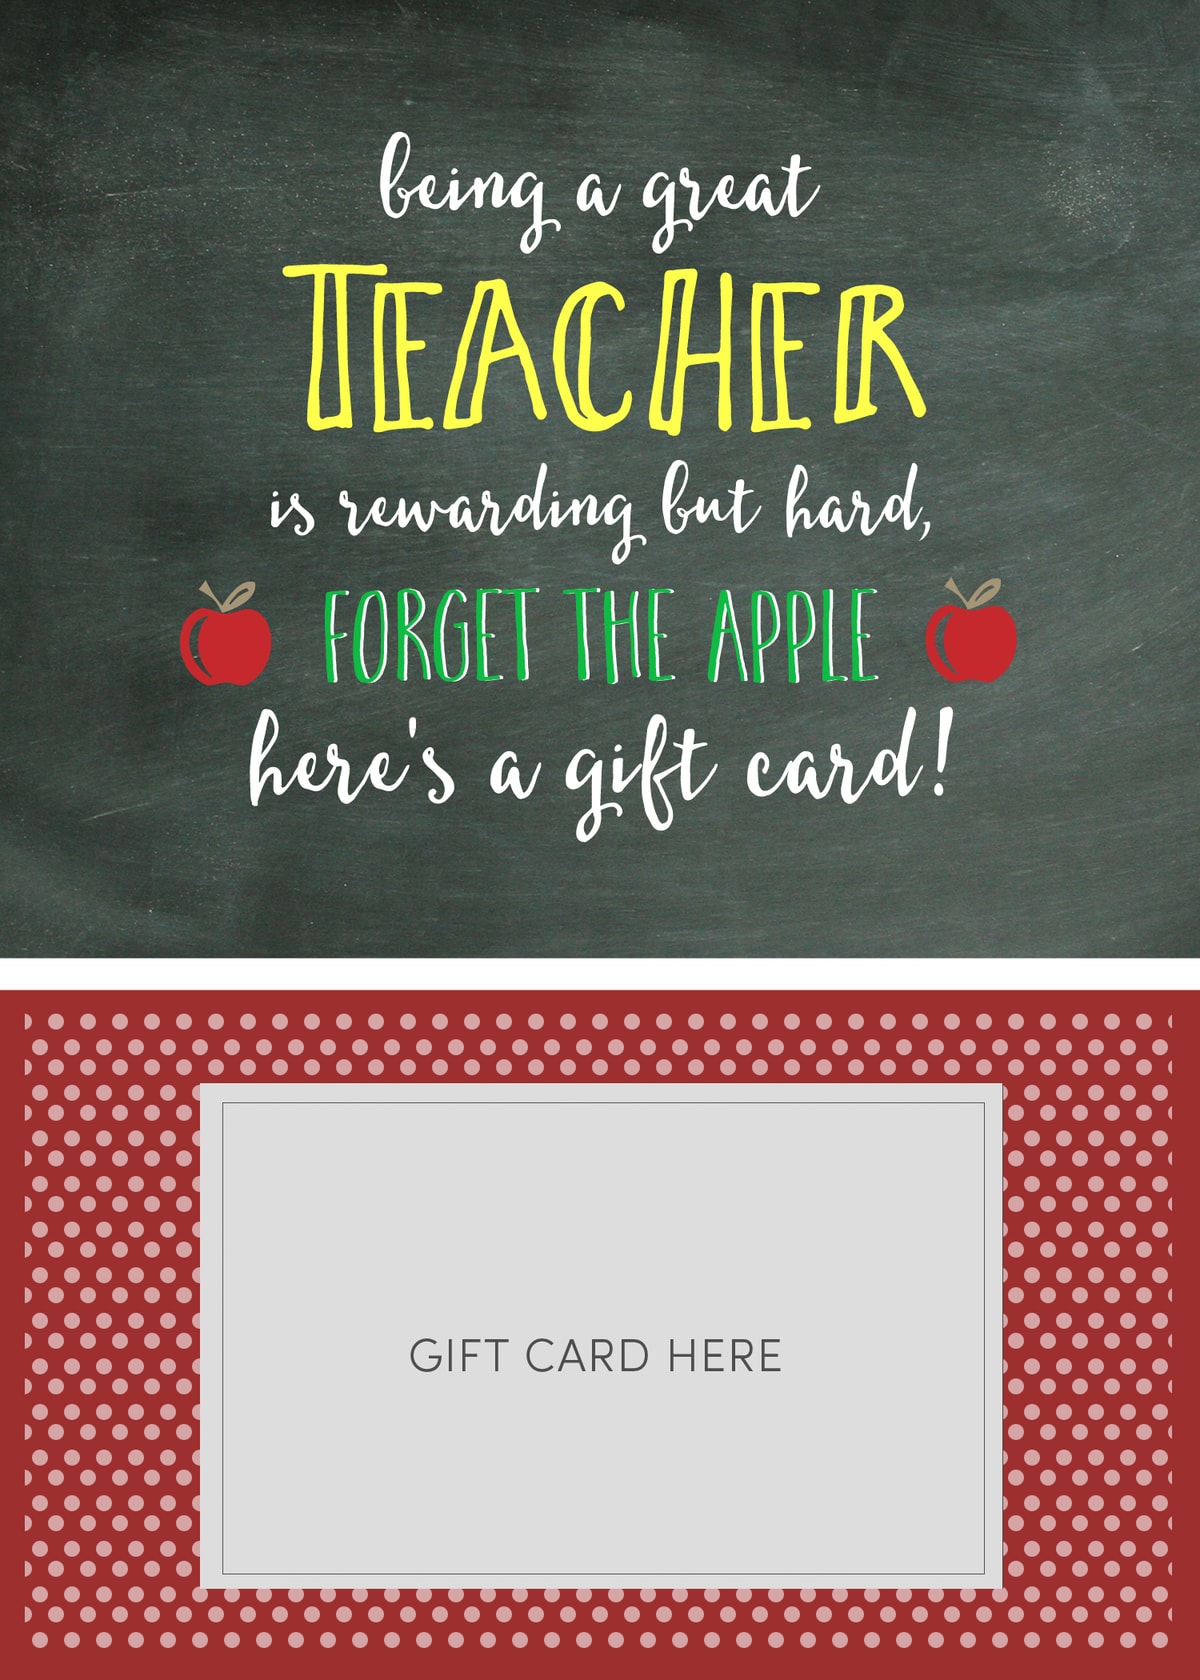 FREE Teacher Appreciation Gift Card Holder - perfect for your favorite teacher and takes just a few minutes to put together.